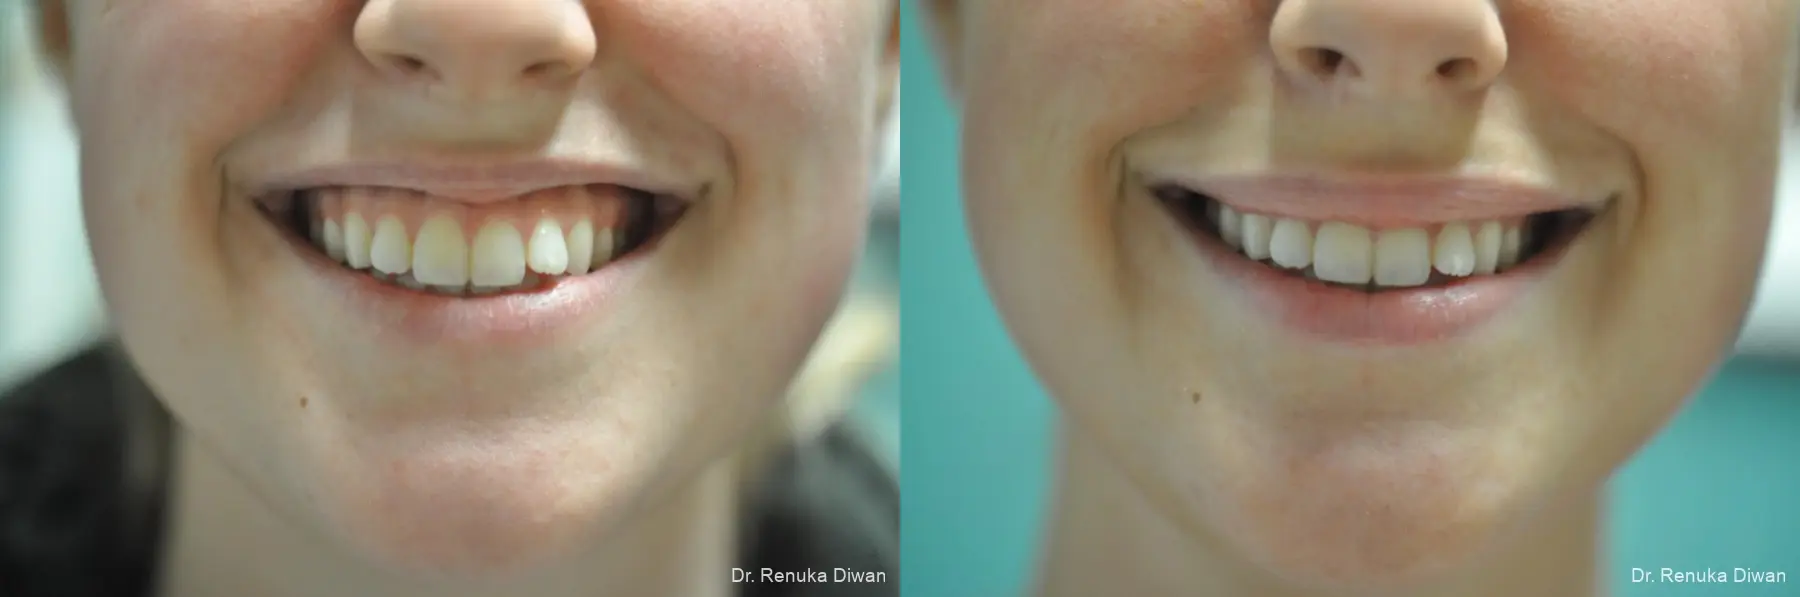 Gummy Smile: Patient 5 - Before and After 1